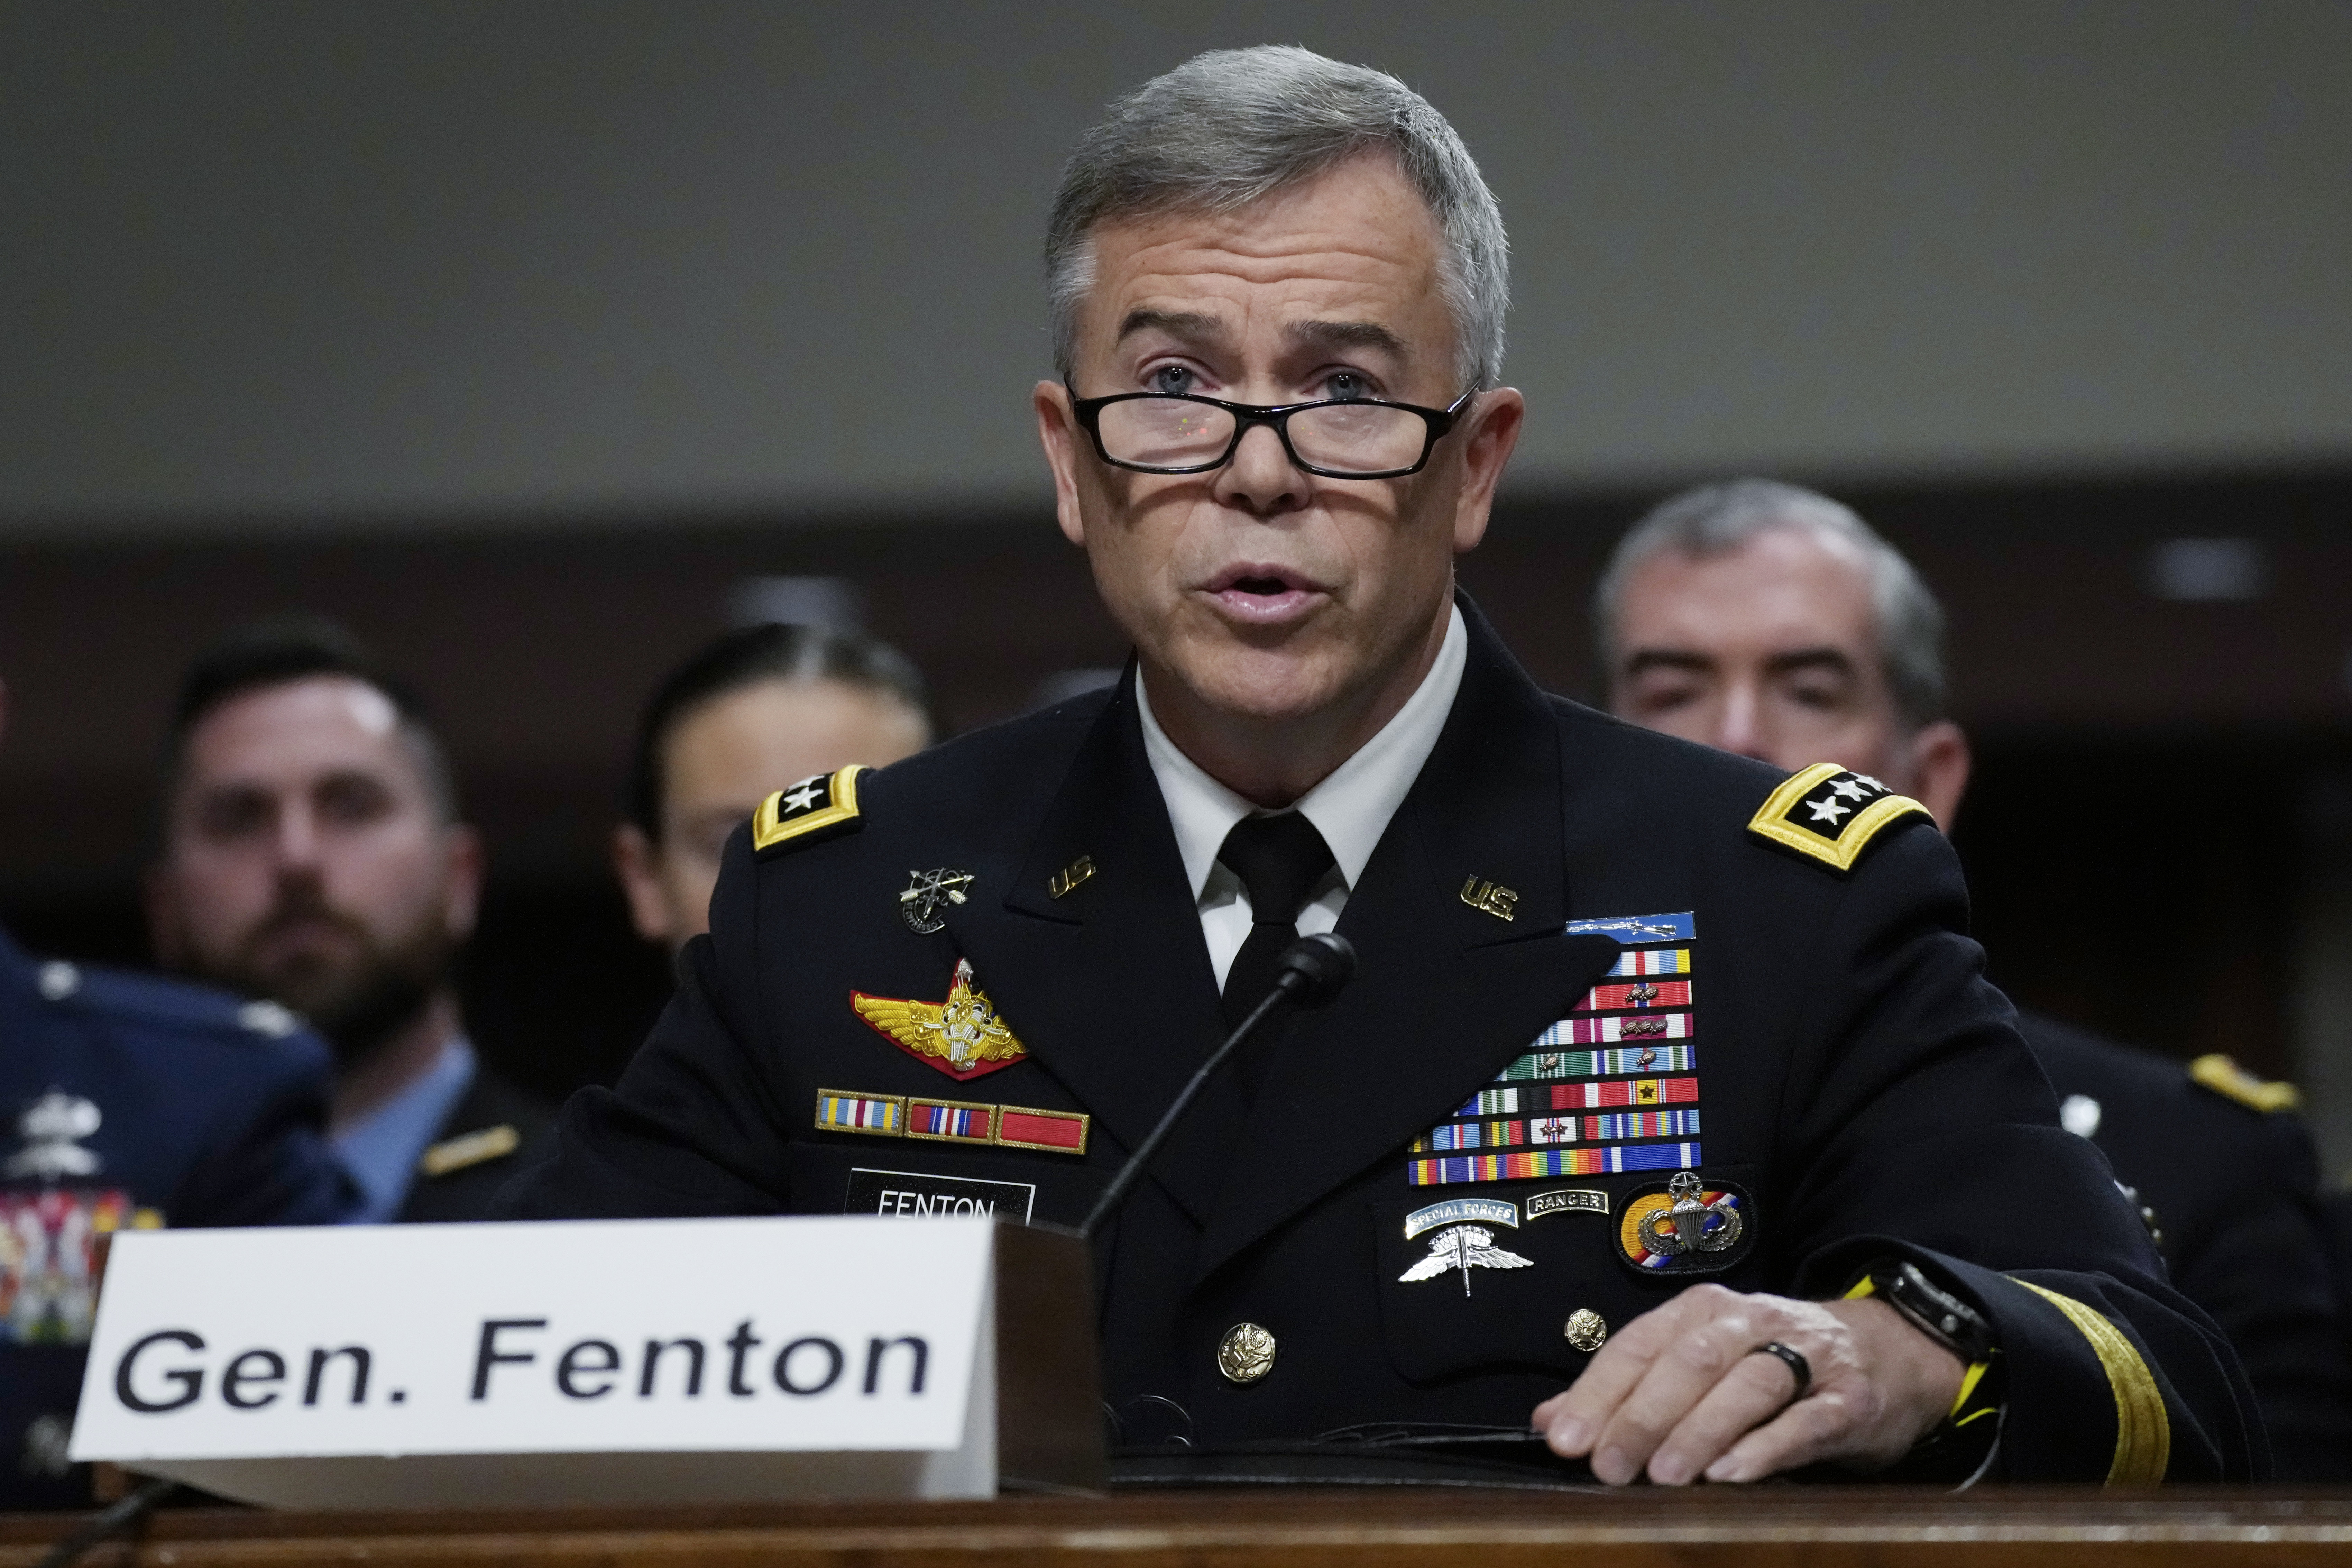 Gen. Bryan Fenton, United States Special Operations Command, testifies during a Senate Armed Services Committee hearing on Capitol Hill, Tuesday, March 7, 2023, in Washington. (AP Photo/Carolyn Kaster)